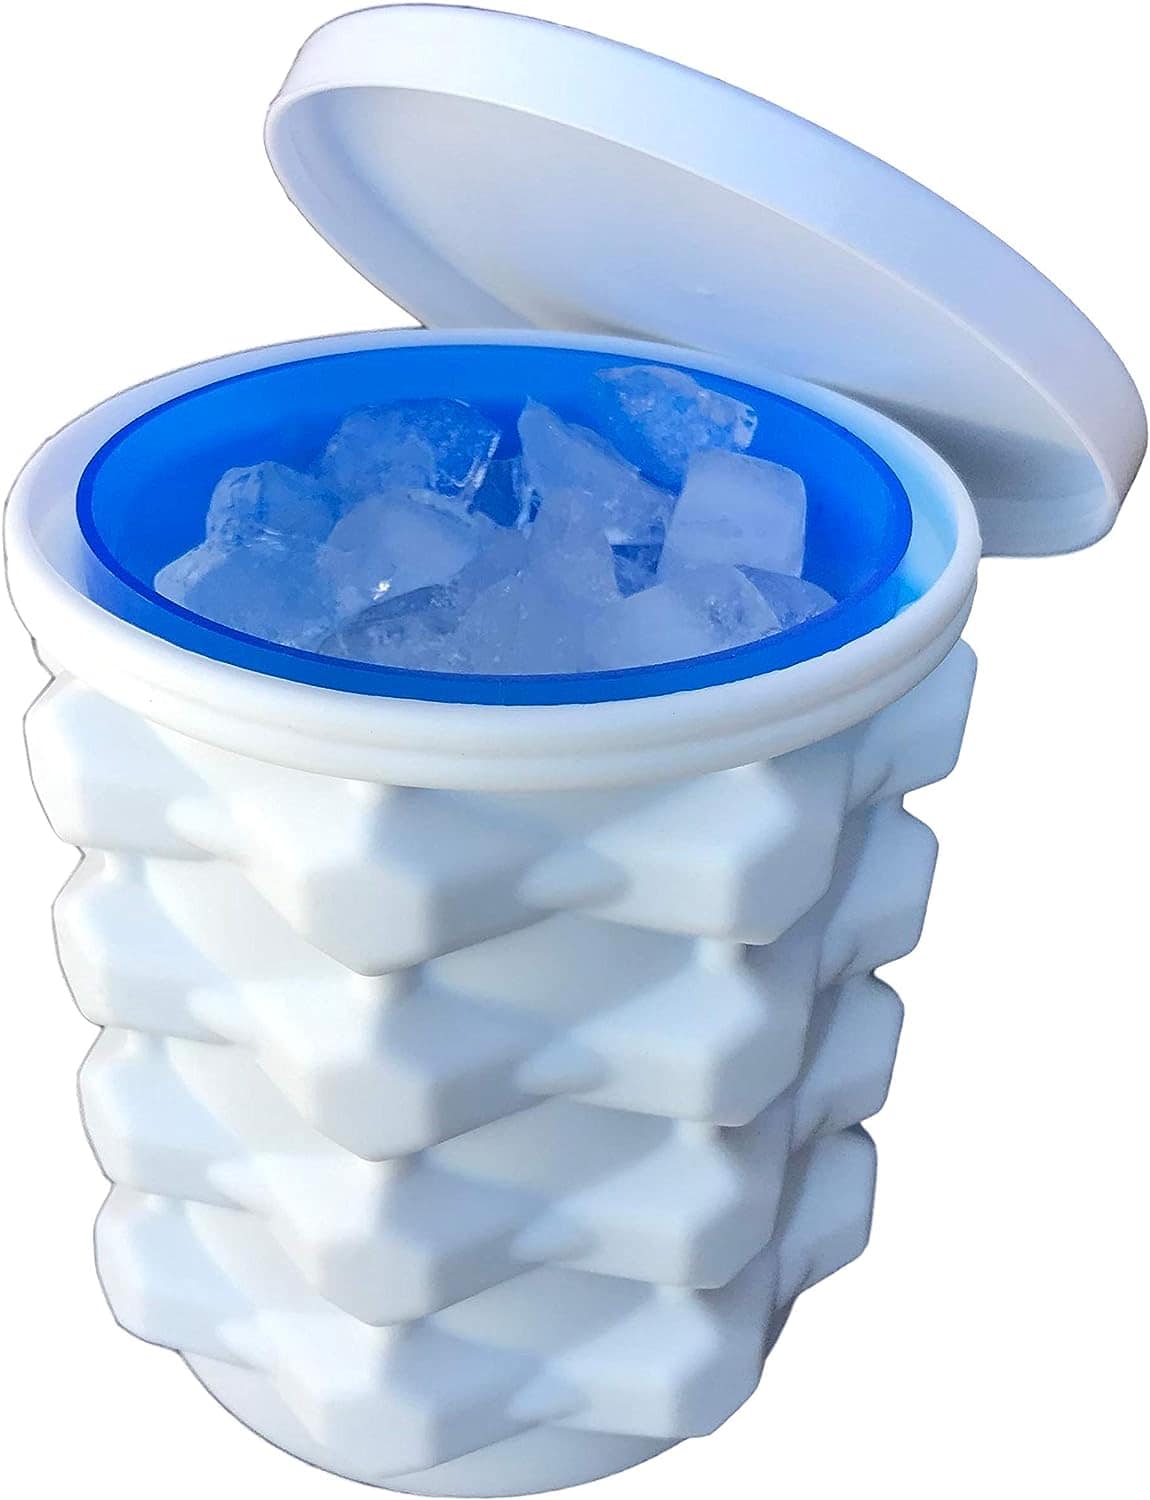 The Ultimate Ice Cube Maker Silicone Bucket with Lid Makes Small-Size Nugget Ice Chips for Soft Drinks Cocktail Ice Wine On Ice Crushed Ice Maker Bucket Ice Tray Silicon Ice Cube Molds Cylinder Ice 2